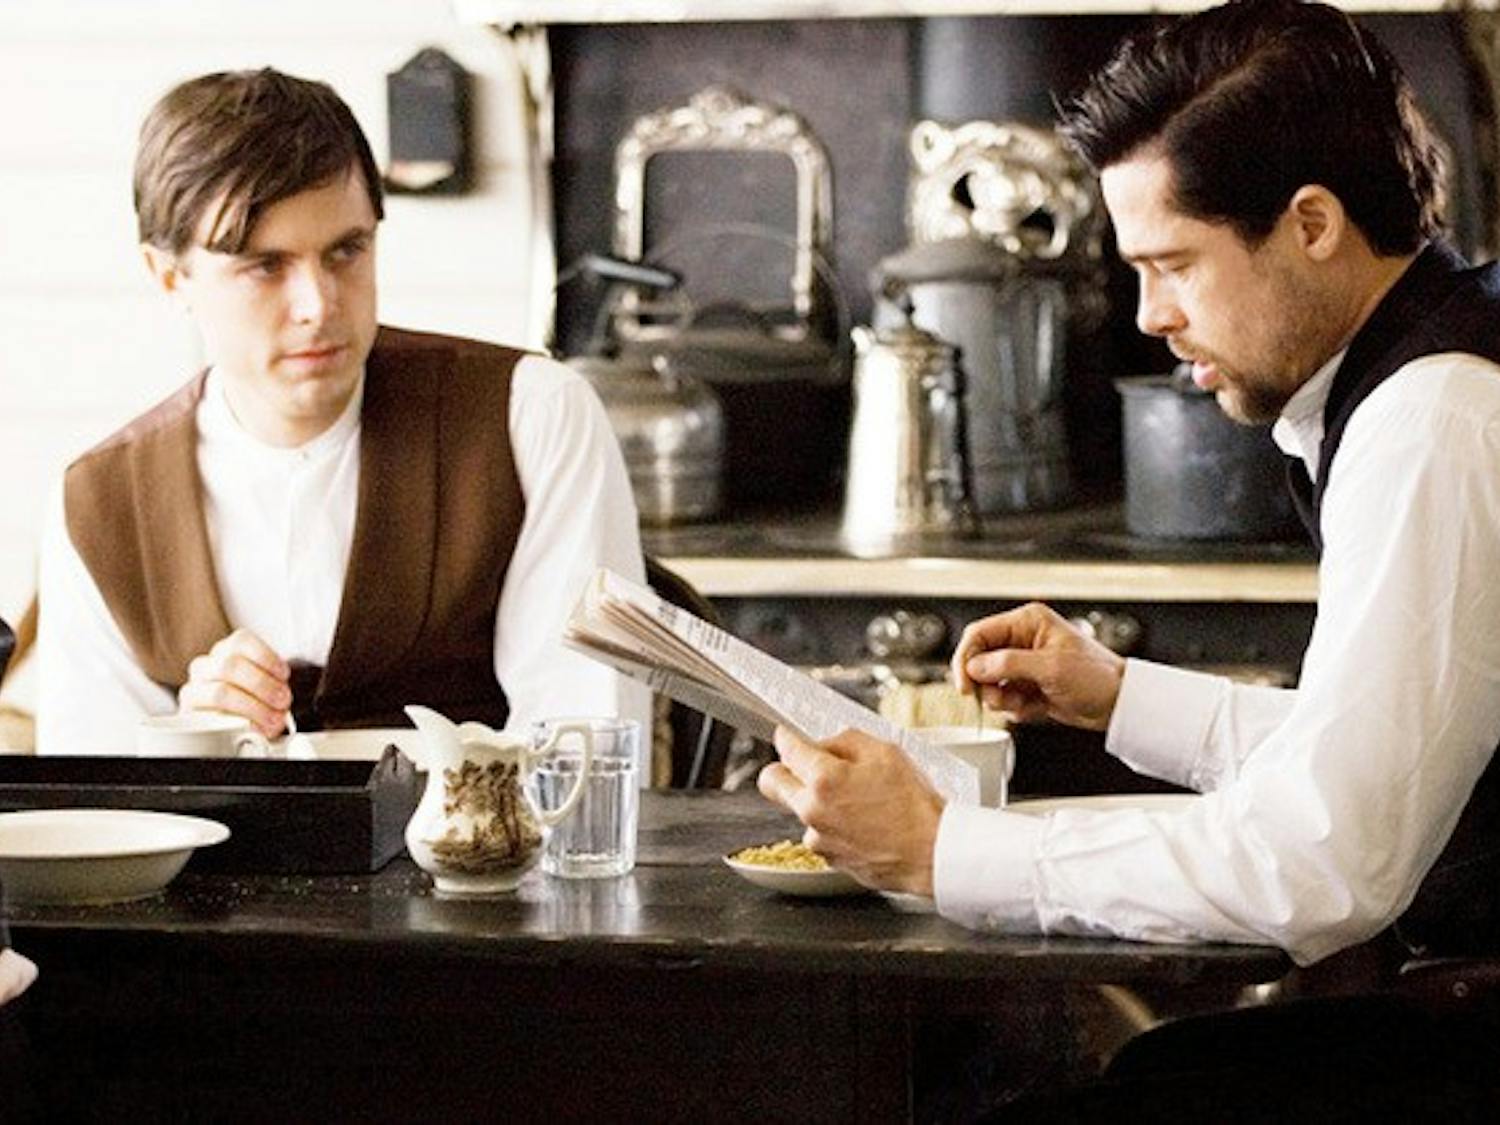 CASEY AFFLECK as Robert Ford and BRAD PITT as Jesse James in Warner Bros. Pictures